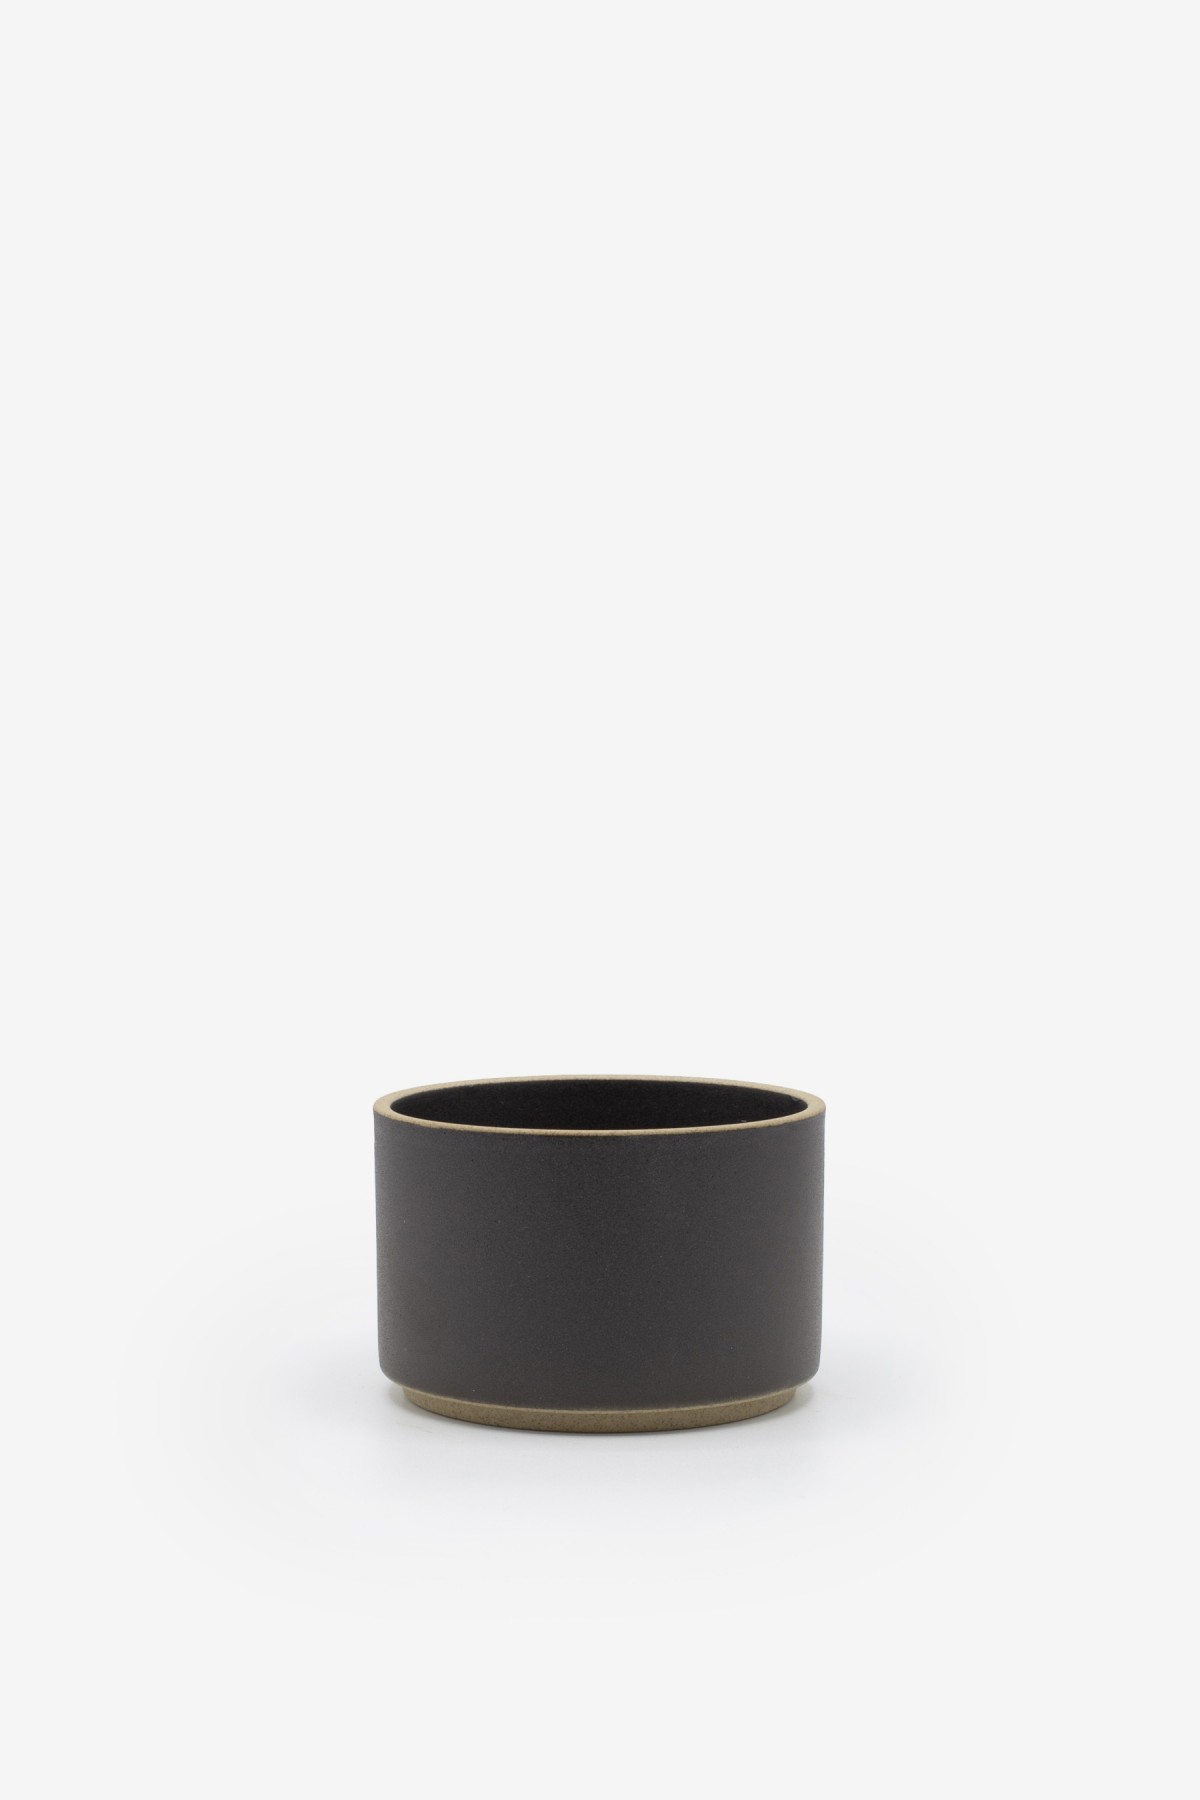 Hasami Porcelain Cup Small in Black